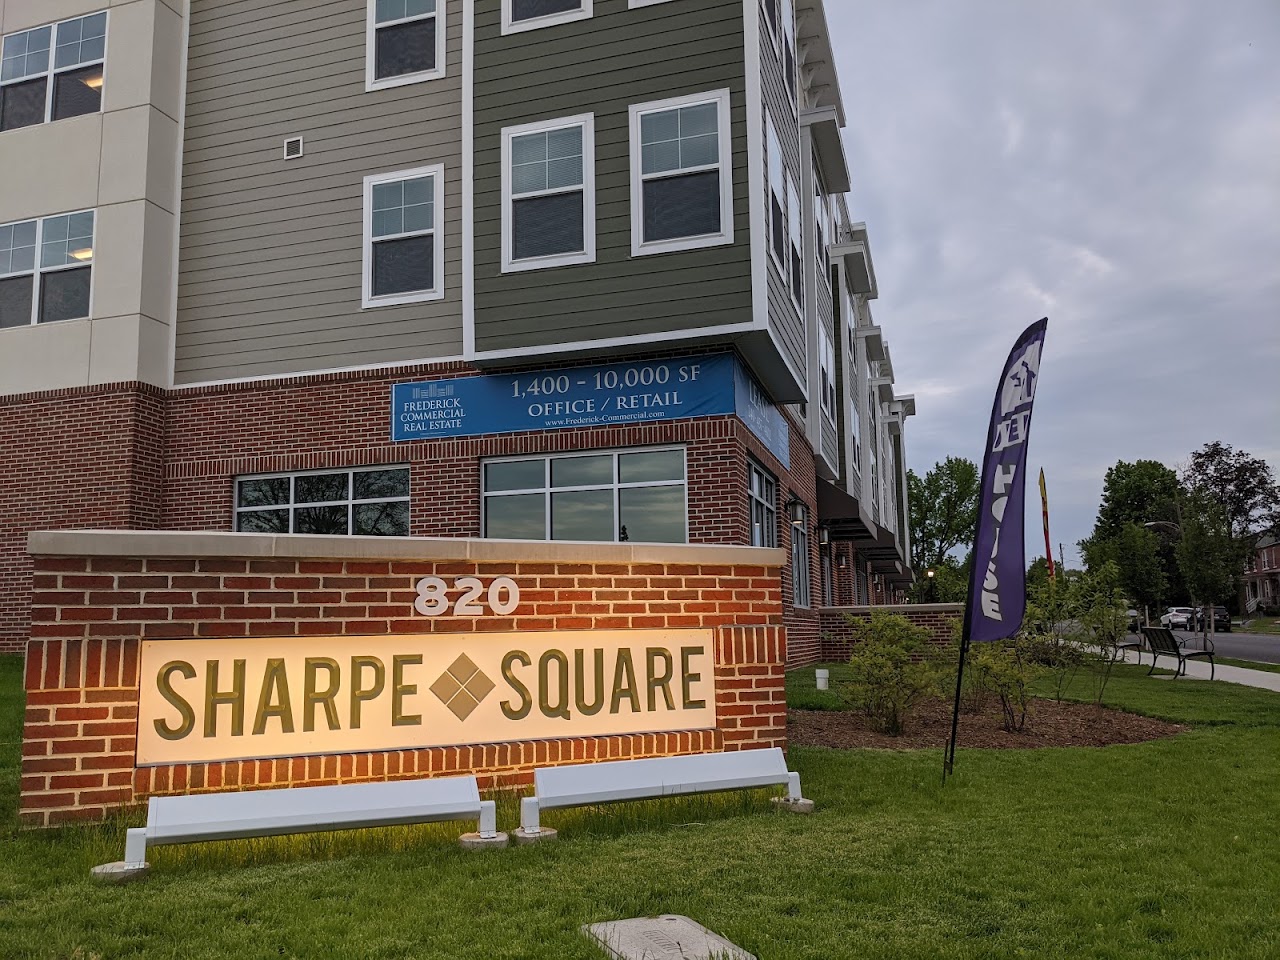 Photo of SHARPE SQUARE at 820 MOTTER AVENUE FREDERICK, MD 21701